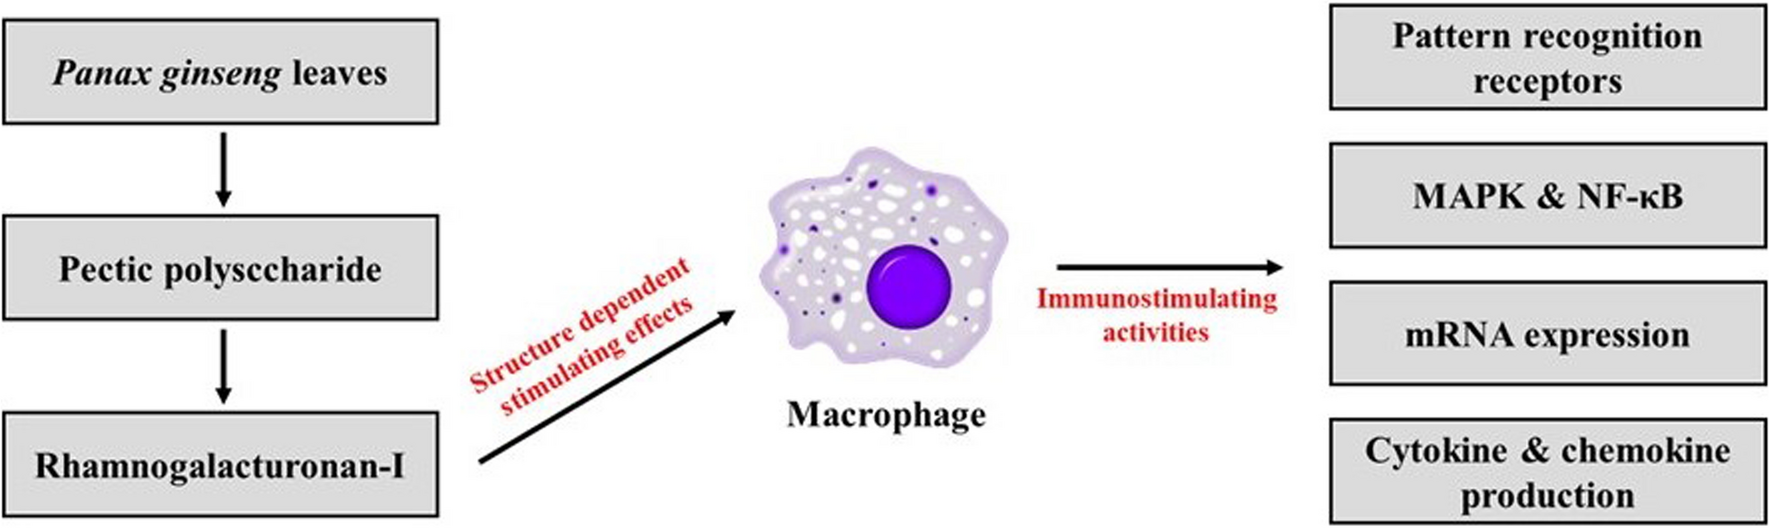 Identification of intracellular activation mechanism of rhamnogalacturonan-I type polysaccharide purified from Panax ginseng leaves in macrophages and roles of component sugar chains on activity